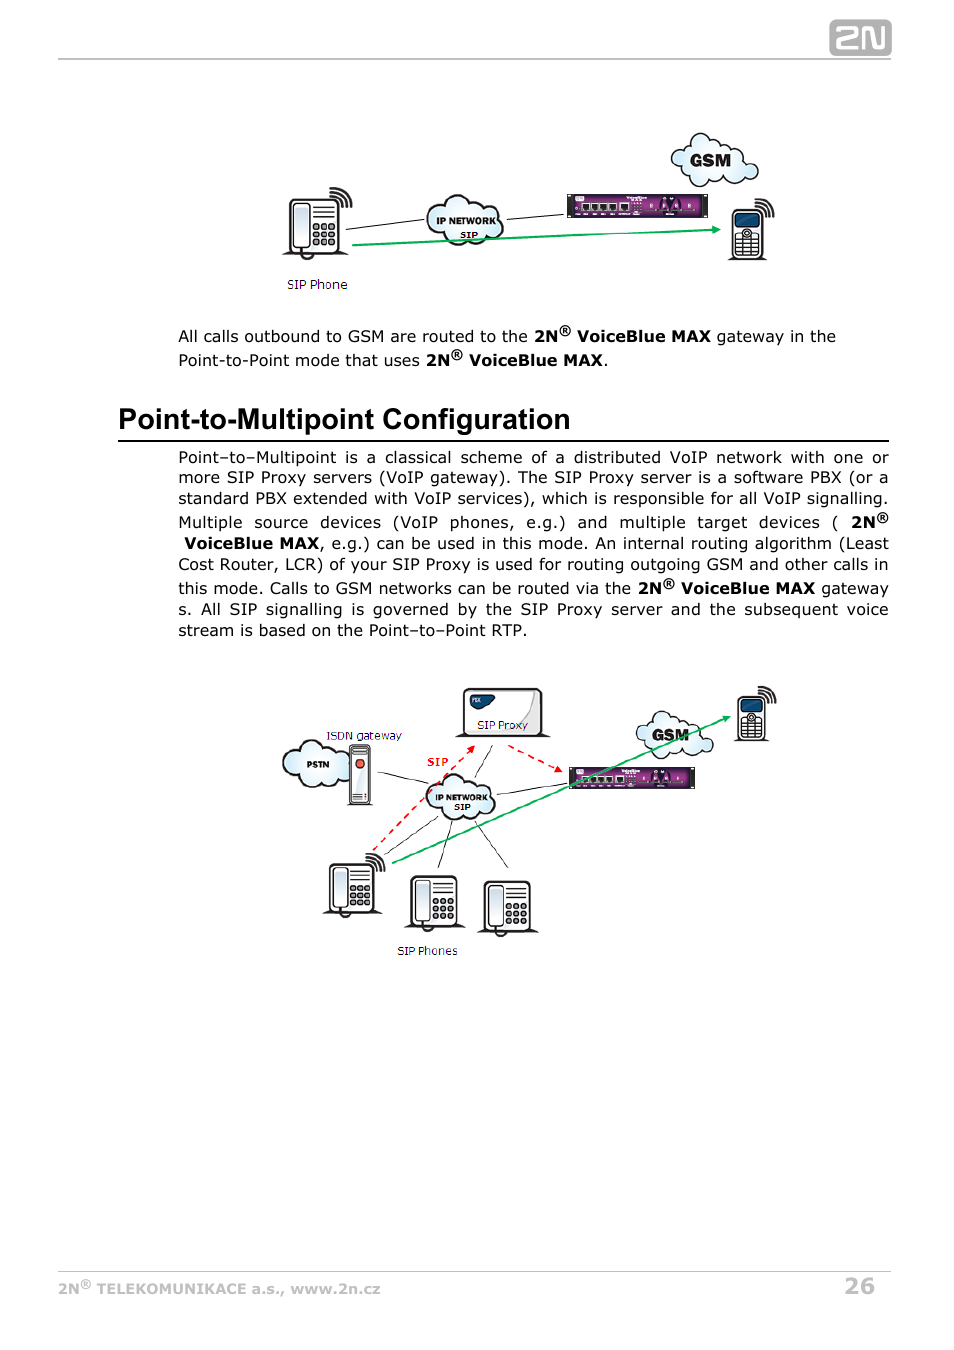 Point-to-multipoint configuration | 2N VoiceBlue MAX v1.2 User Manual | Page 26 / 111